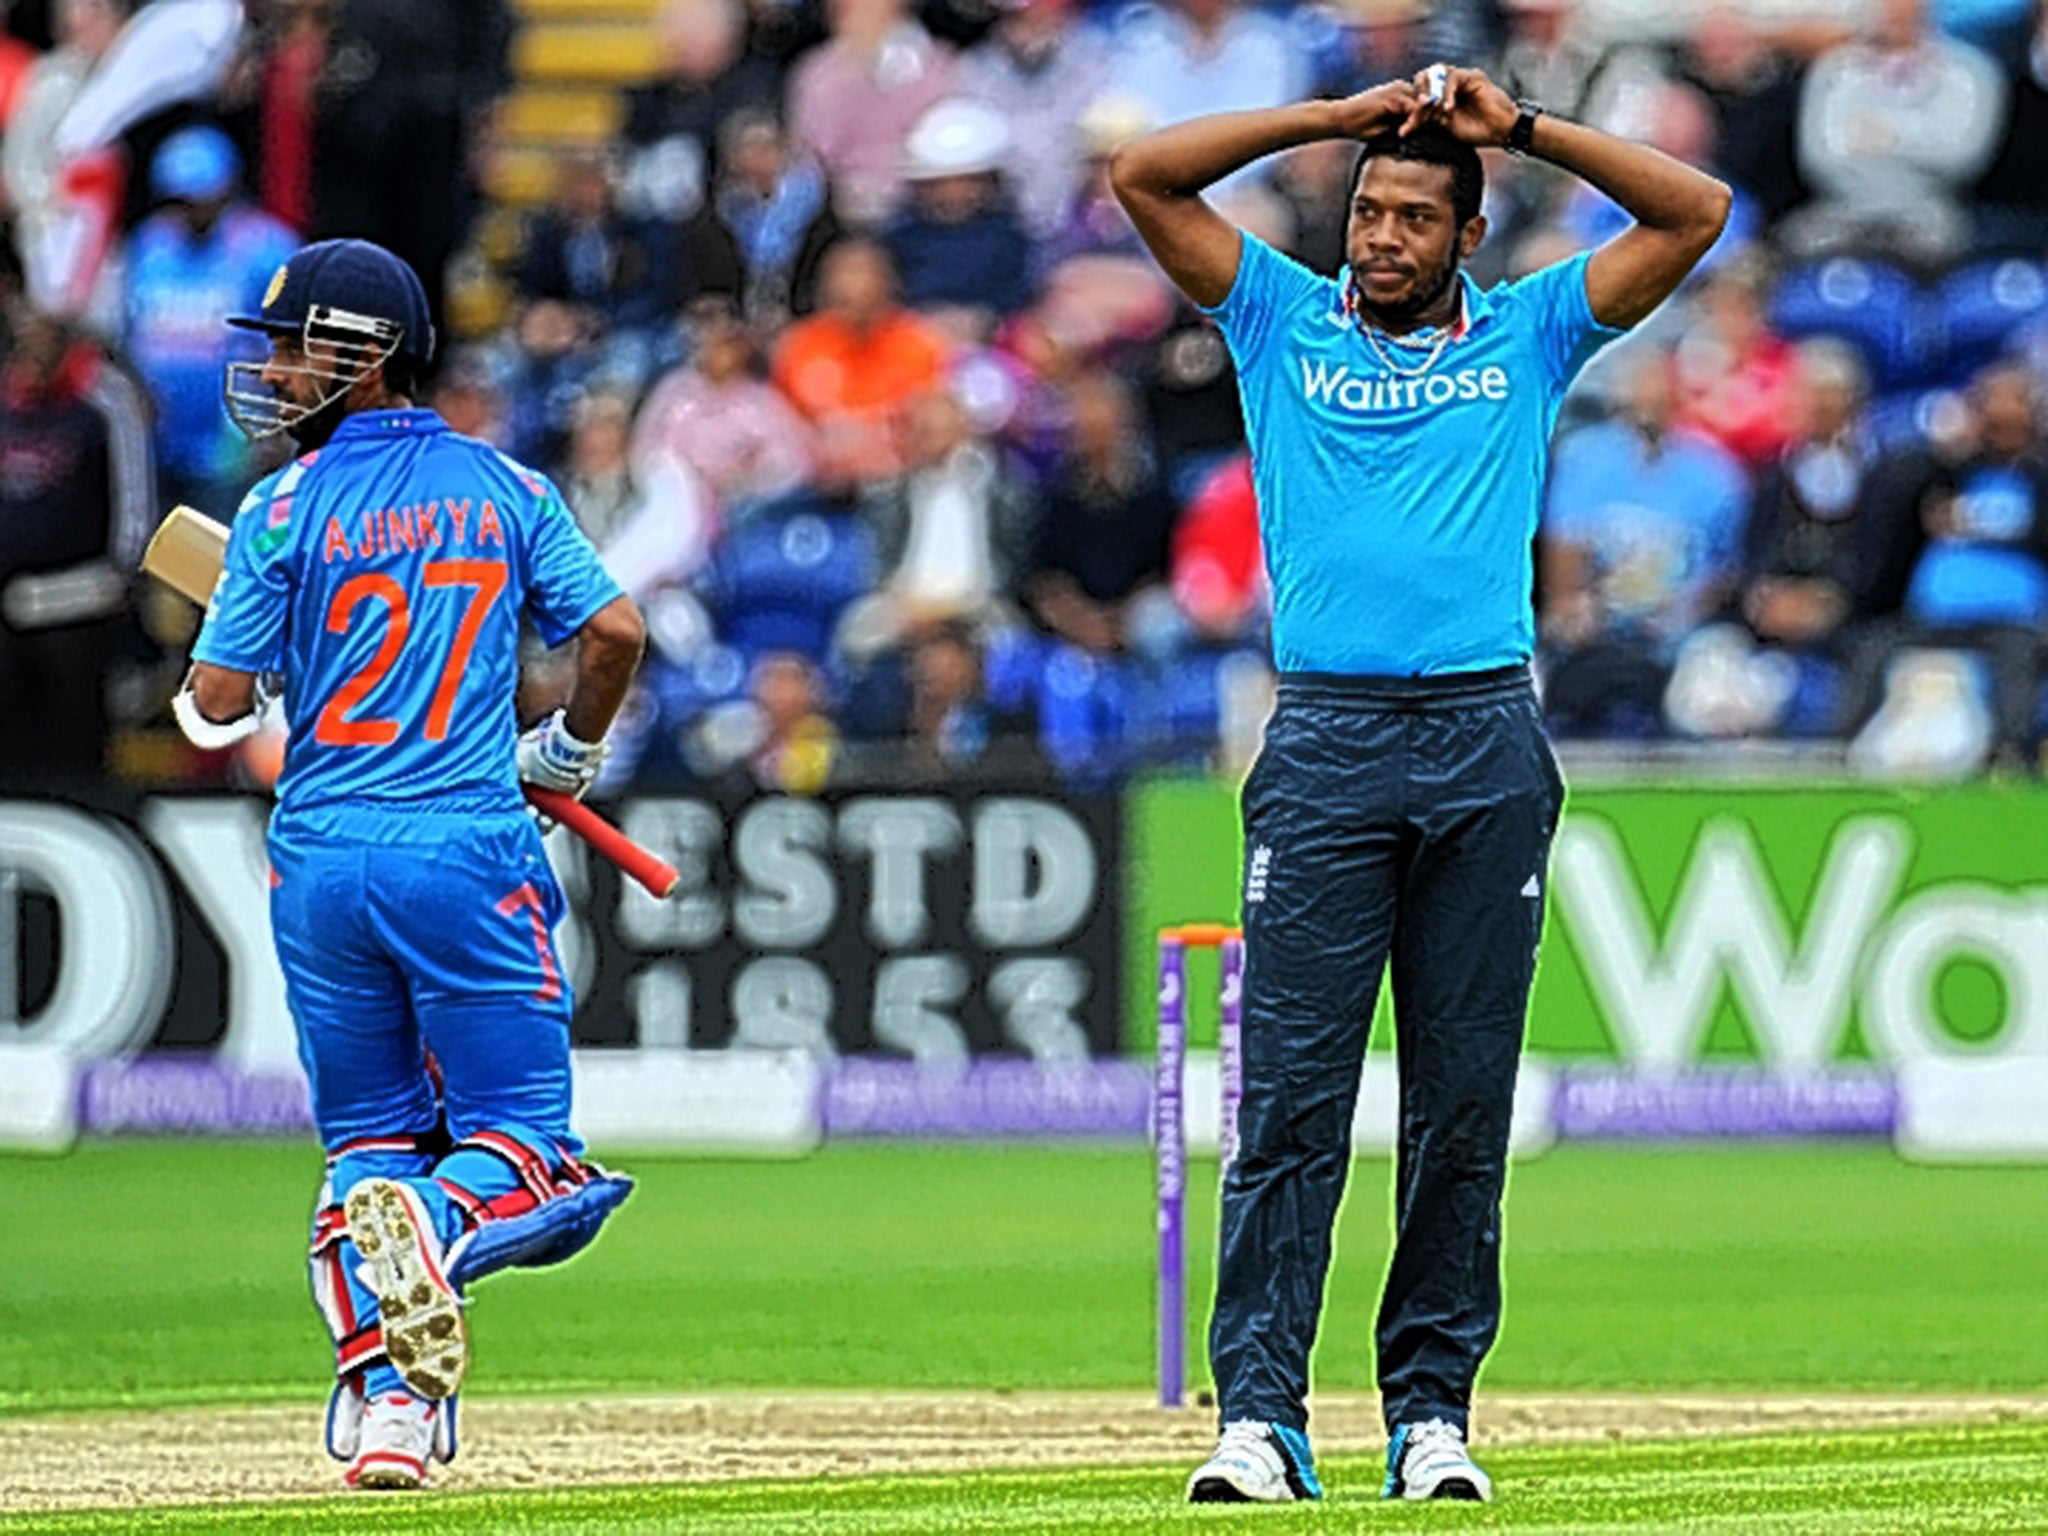 Chris Jordan looked a shadow of his former self during England’s defeat in Cardiff